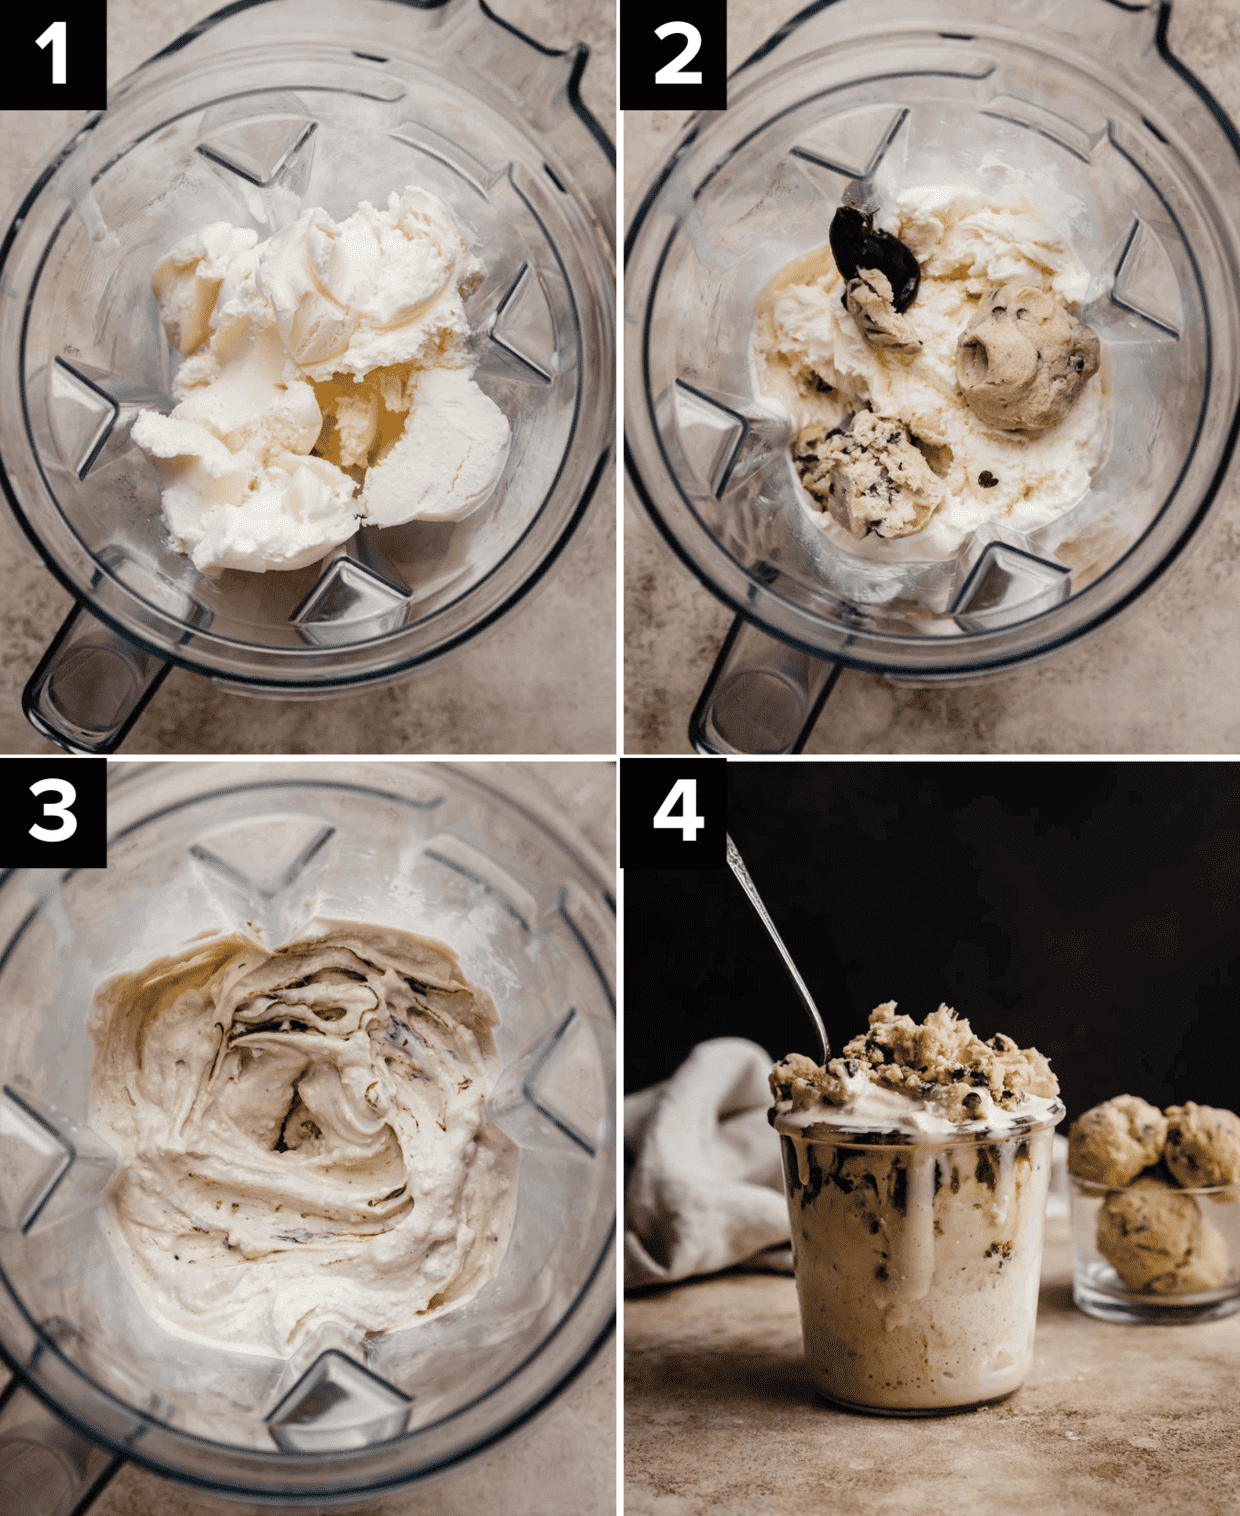 Four images showing how to make a Chocolate Chip Cookie Dough Blizzard, top left image is ice cream in blender, top right is ice cream and cookie dough chunks in blender, bottom left image is Chocolate Chip Cookie Dough Blizzard in blender, bottom right image is Chocolate Chip Cookie Dough Blizzard in a glass cup.